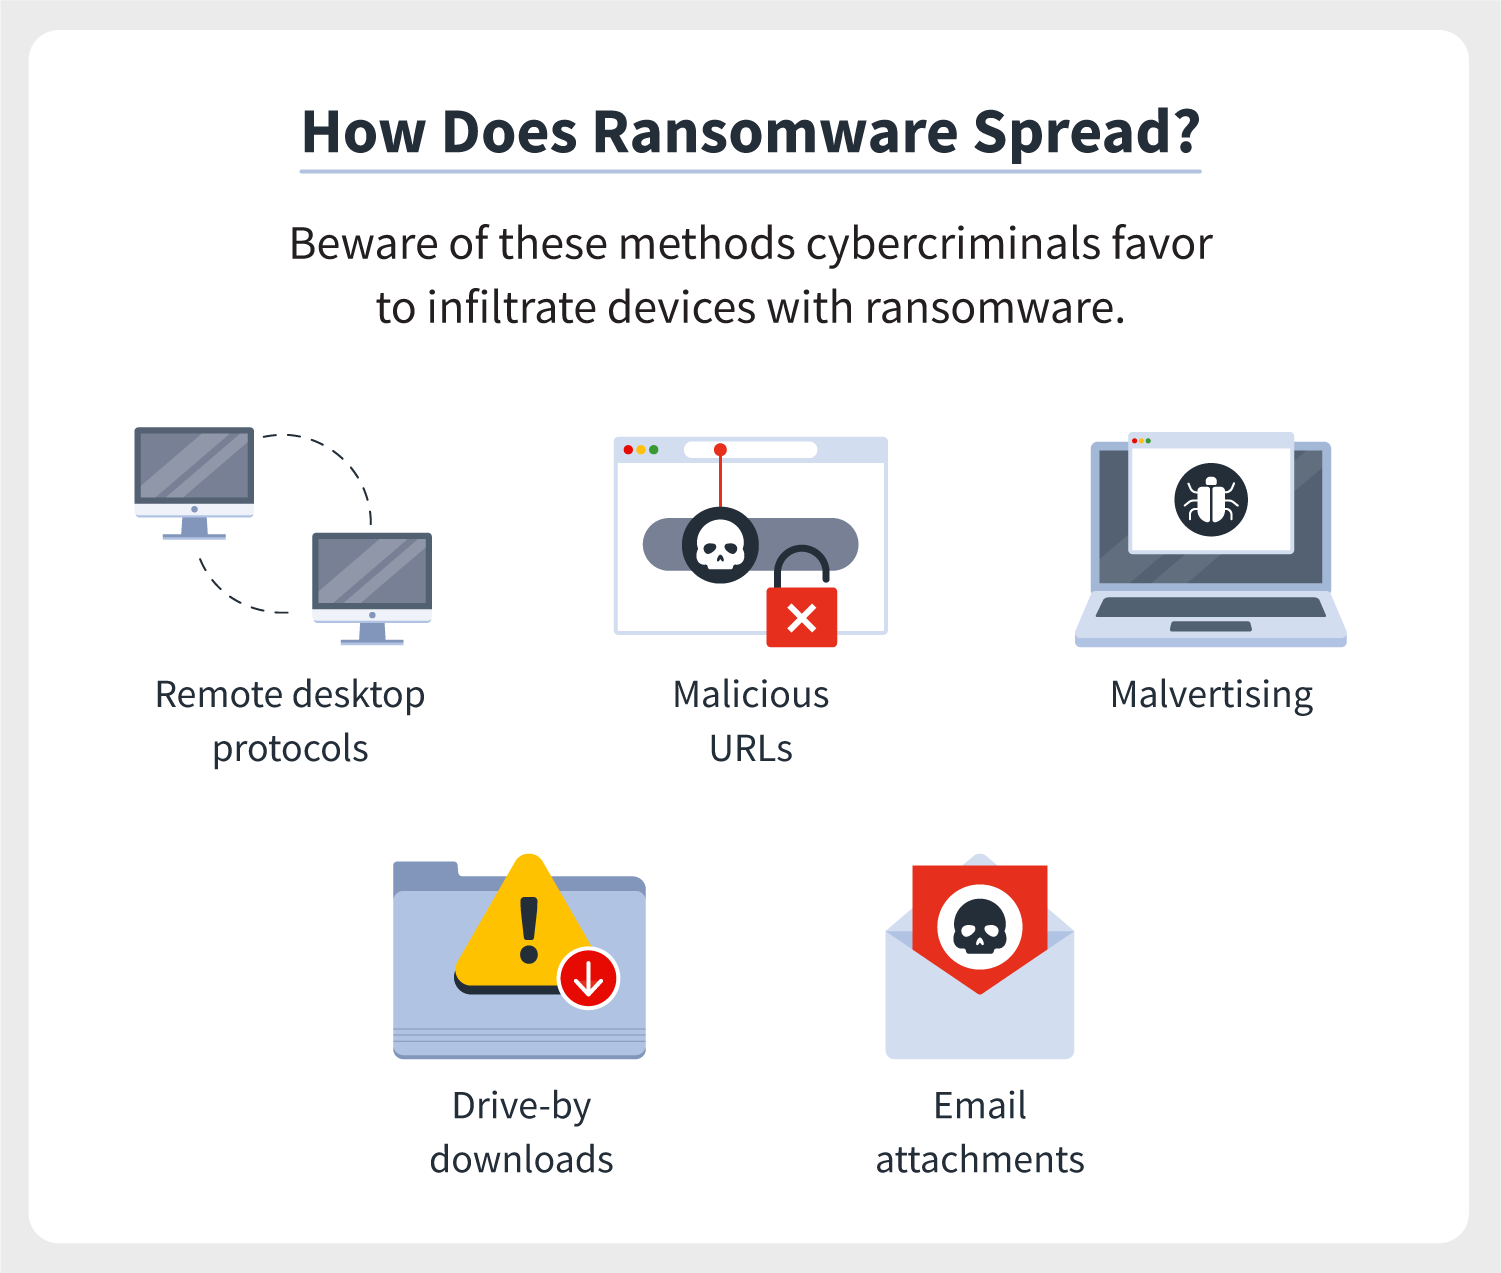 Five illustrations depict the methods hackers use to spread different types of ransomware on the internet. 